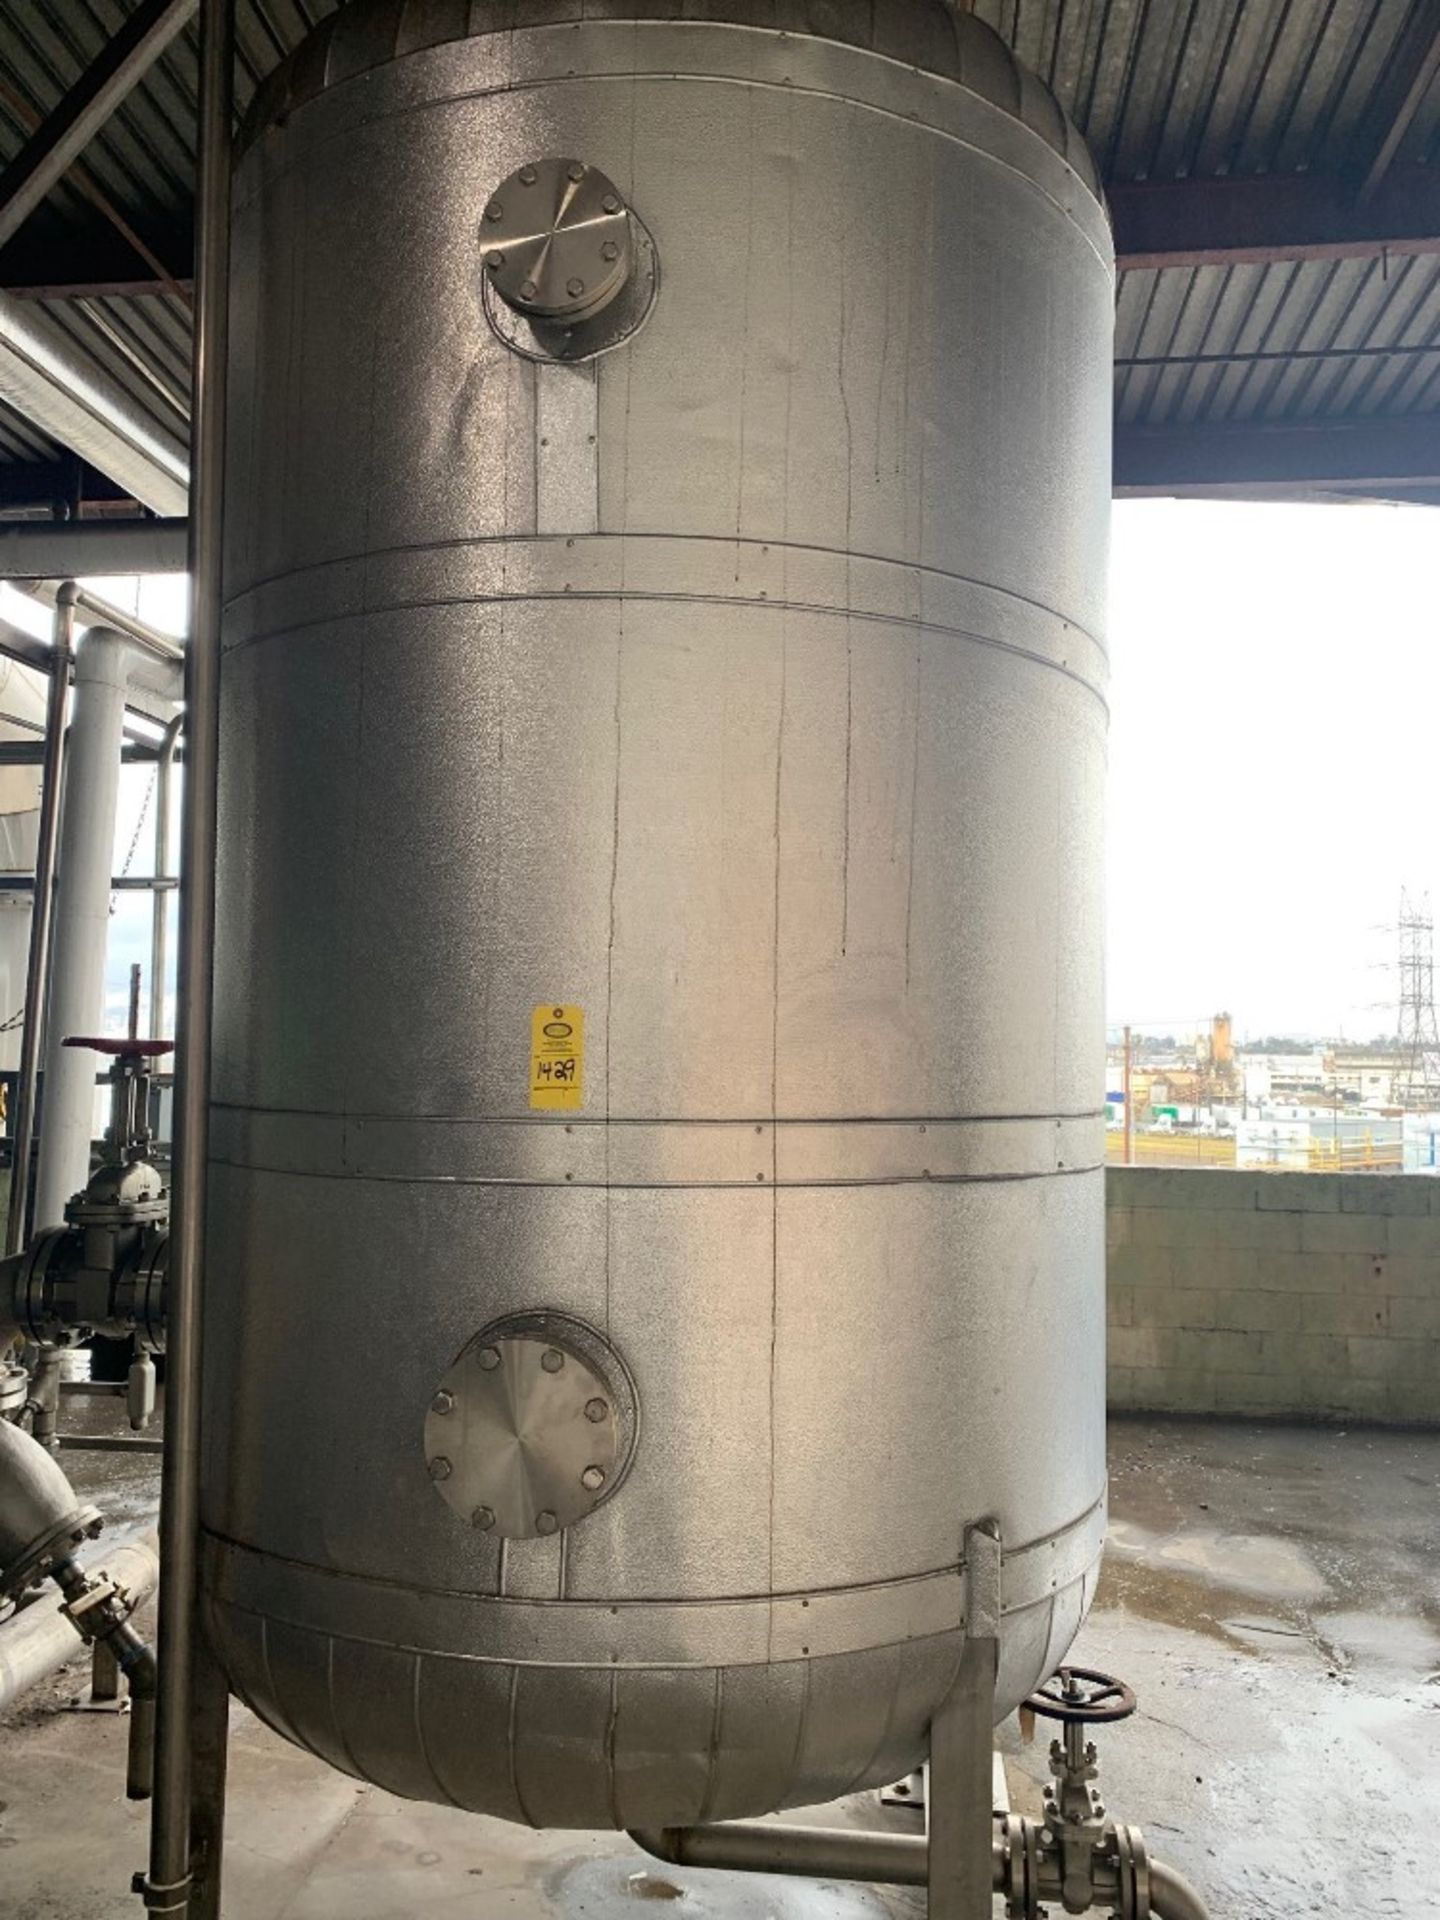 Insulated Stainless Steel Tank, high pressure, hot water storage tank, 6' Dia. X 10' T approx.: